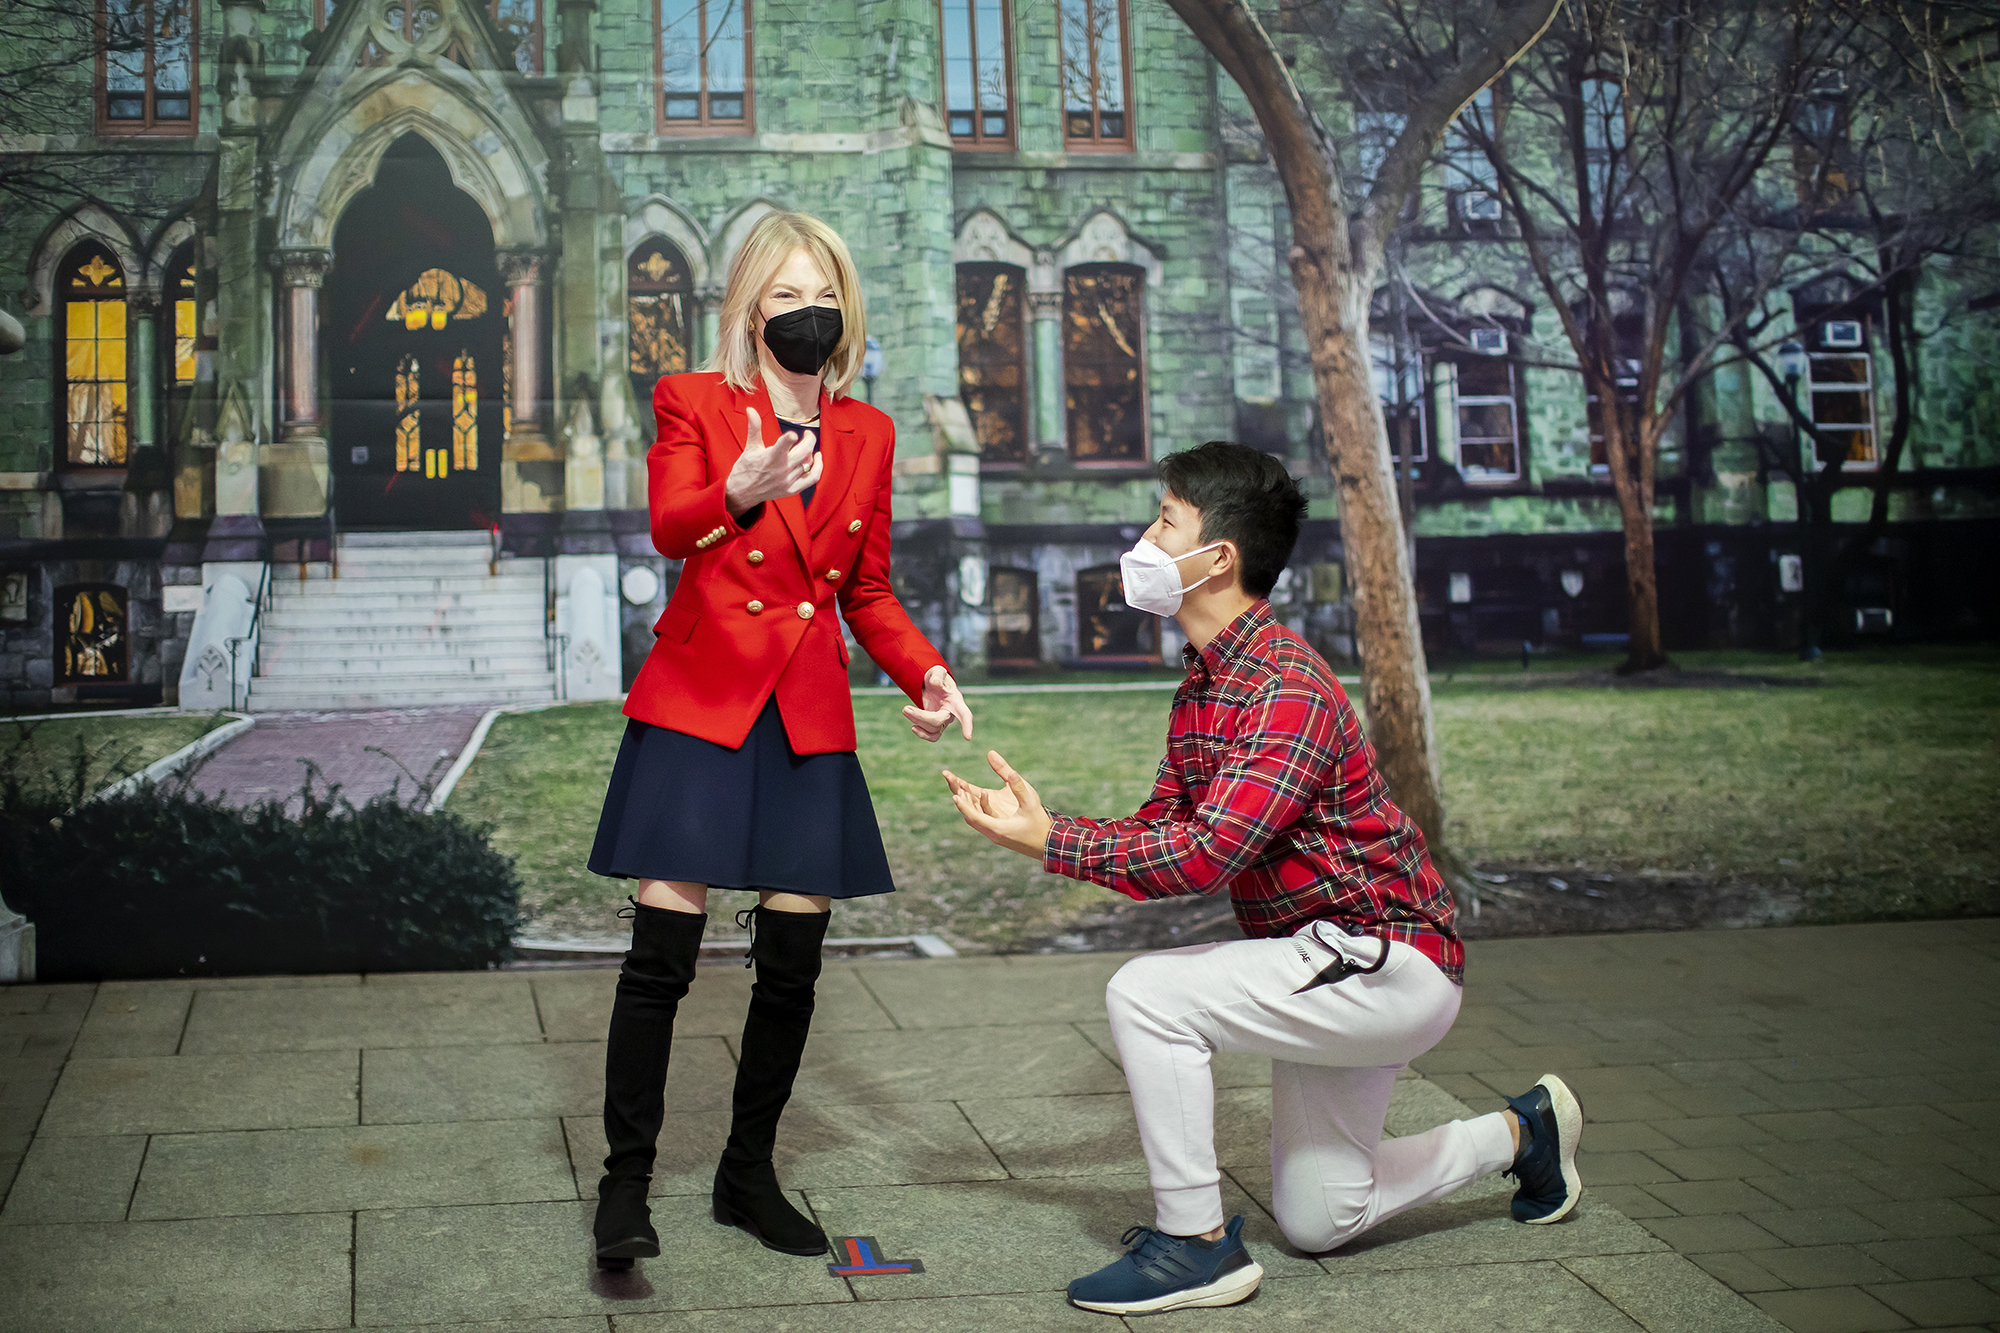 Penn President Amy Gutmann and a student on one knee next to her.